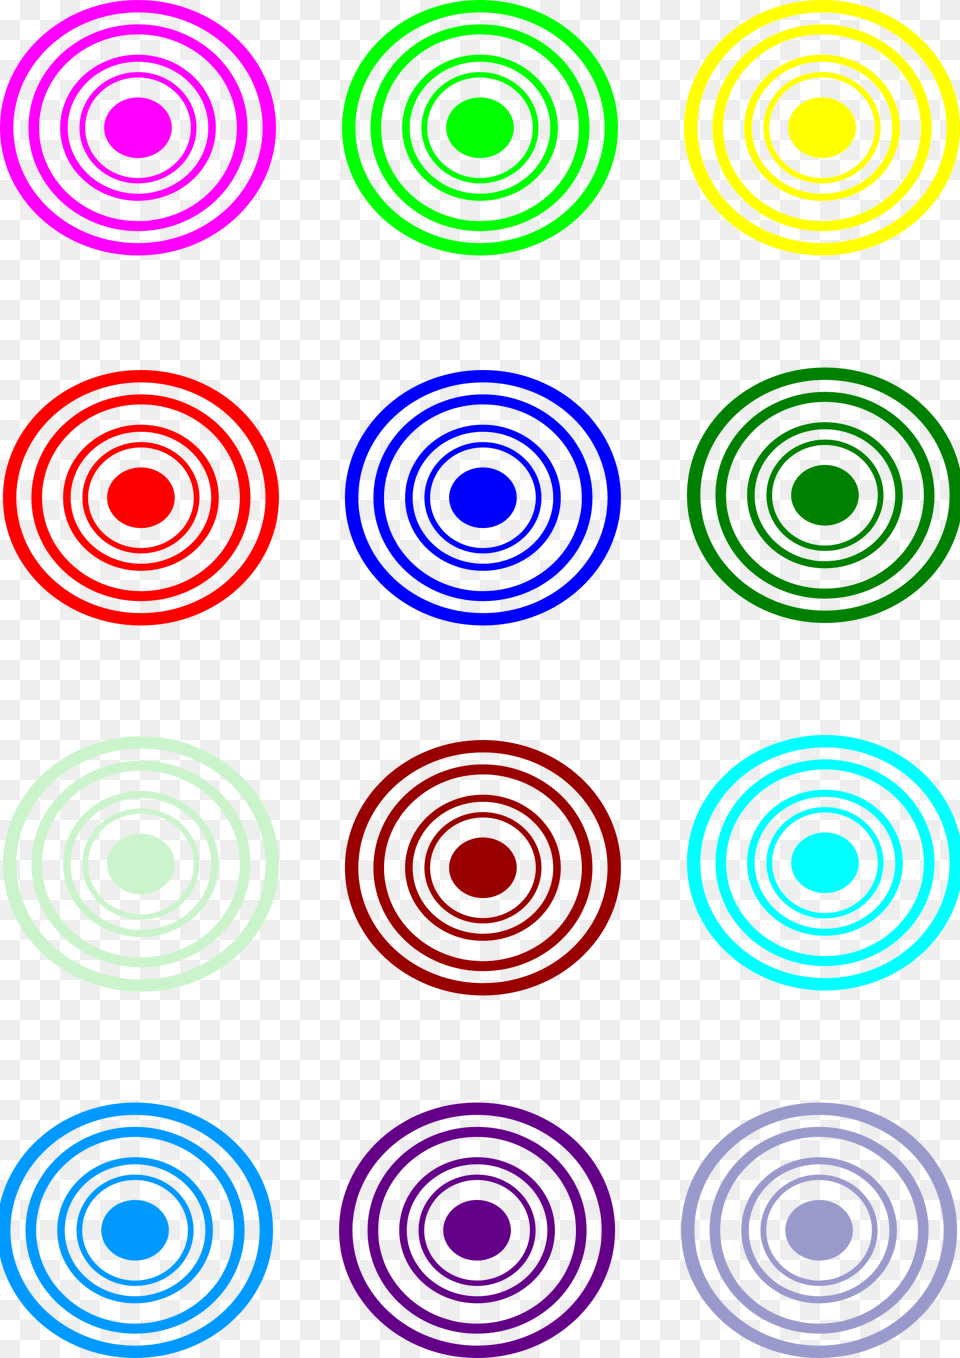 This Icons Design Of Target Practice, Spiral, Coil, Car, Transportation Free Png